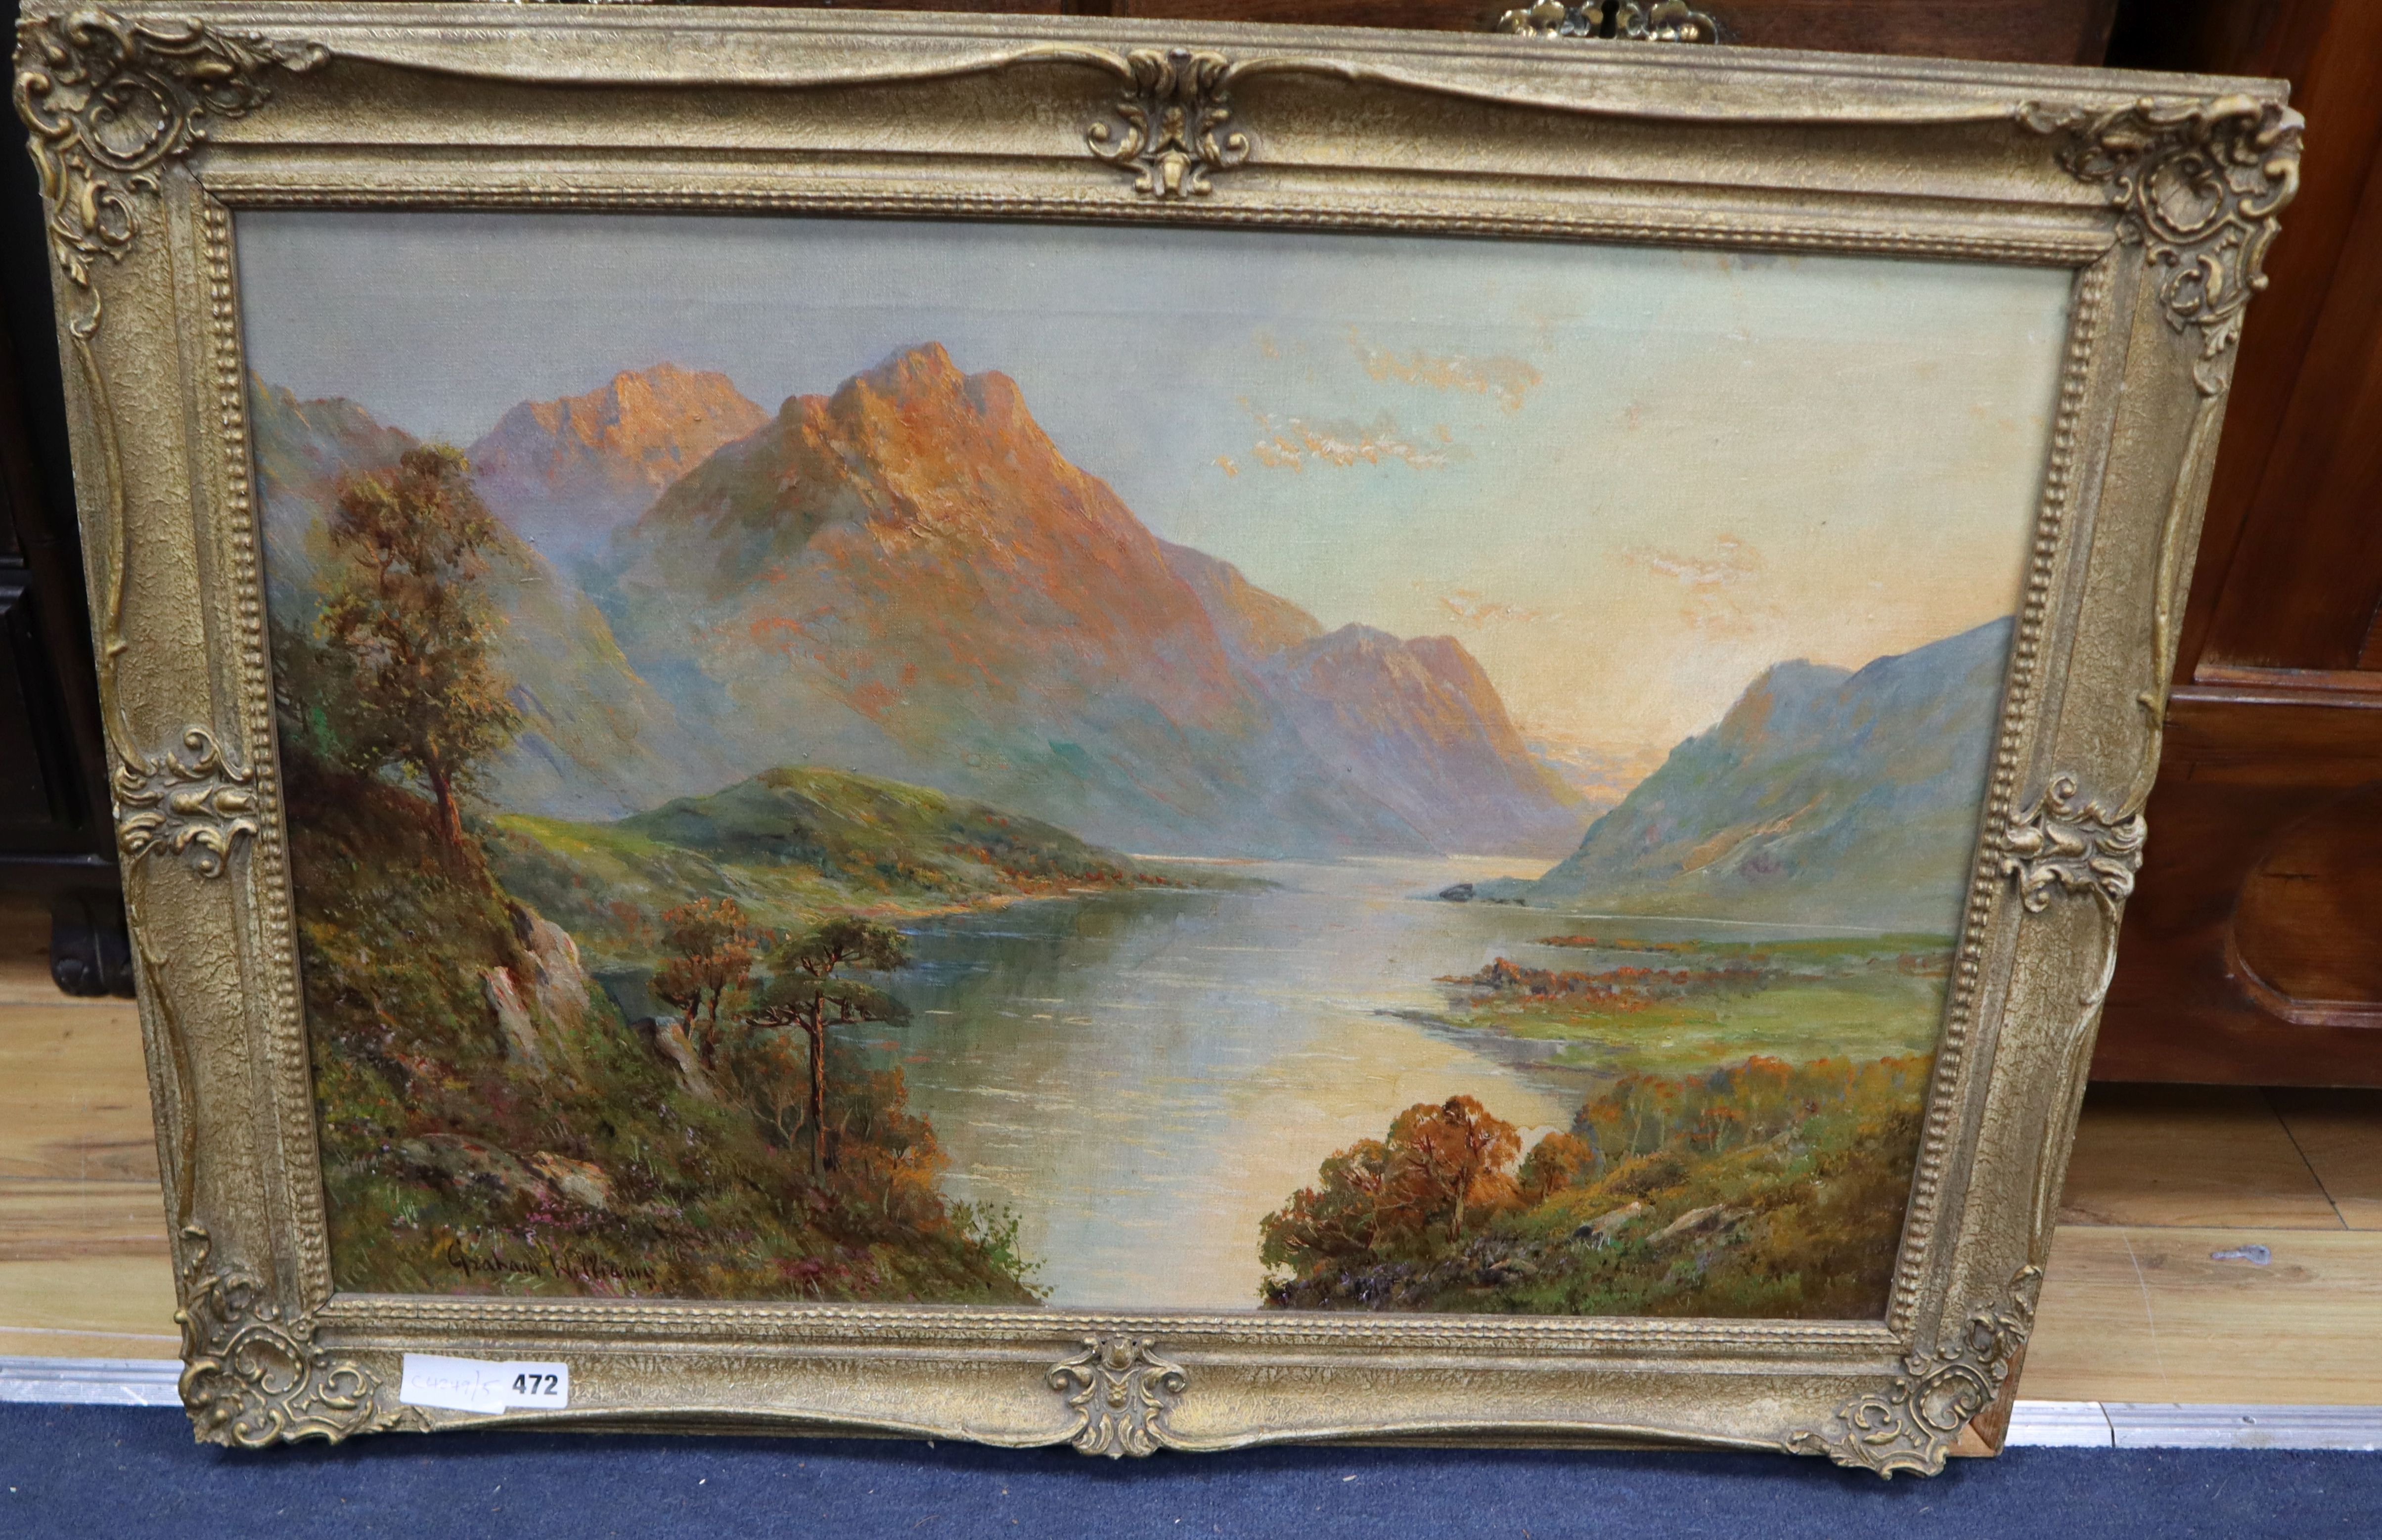 Graham Williams (A.K.A. Francis Jamieson 1895-1950), oil on canvas, Helvellyn, Thirlmere, Lake